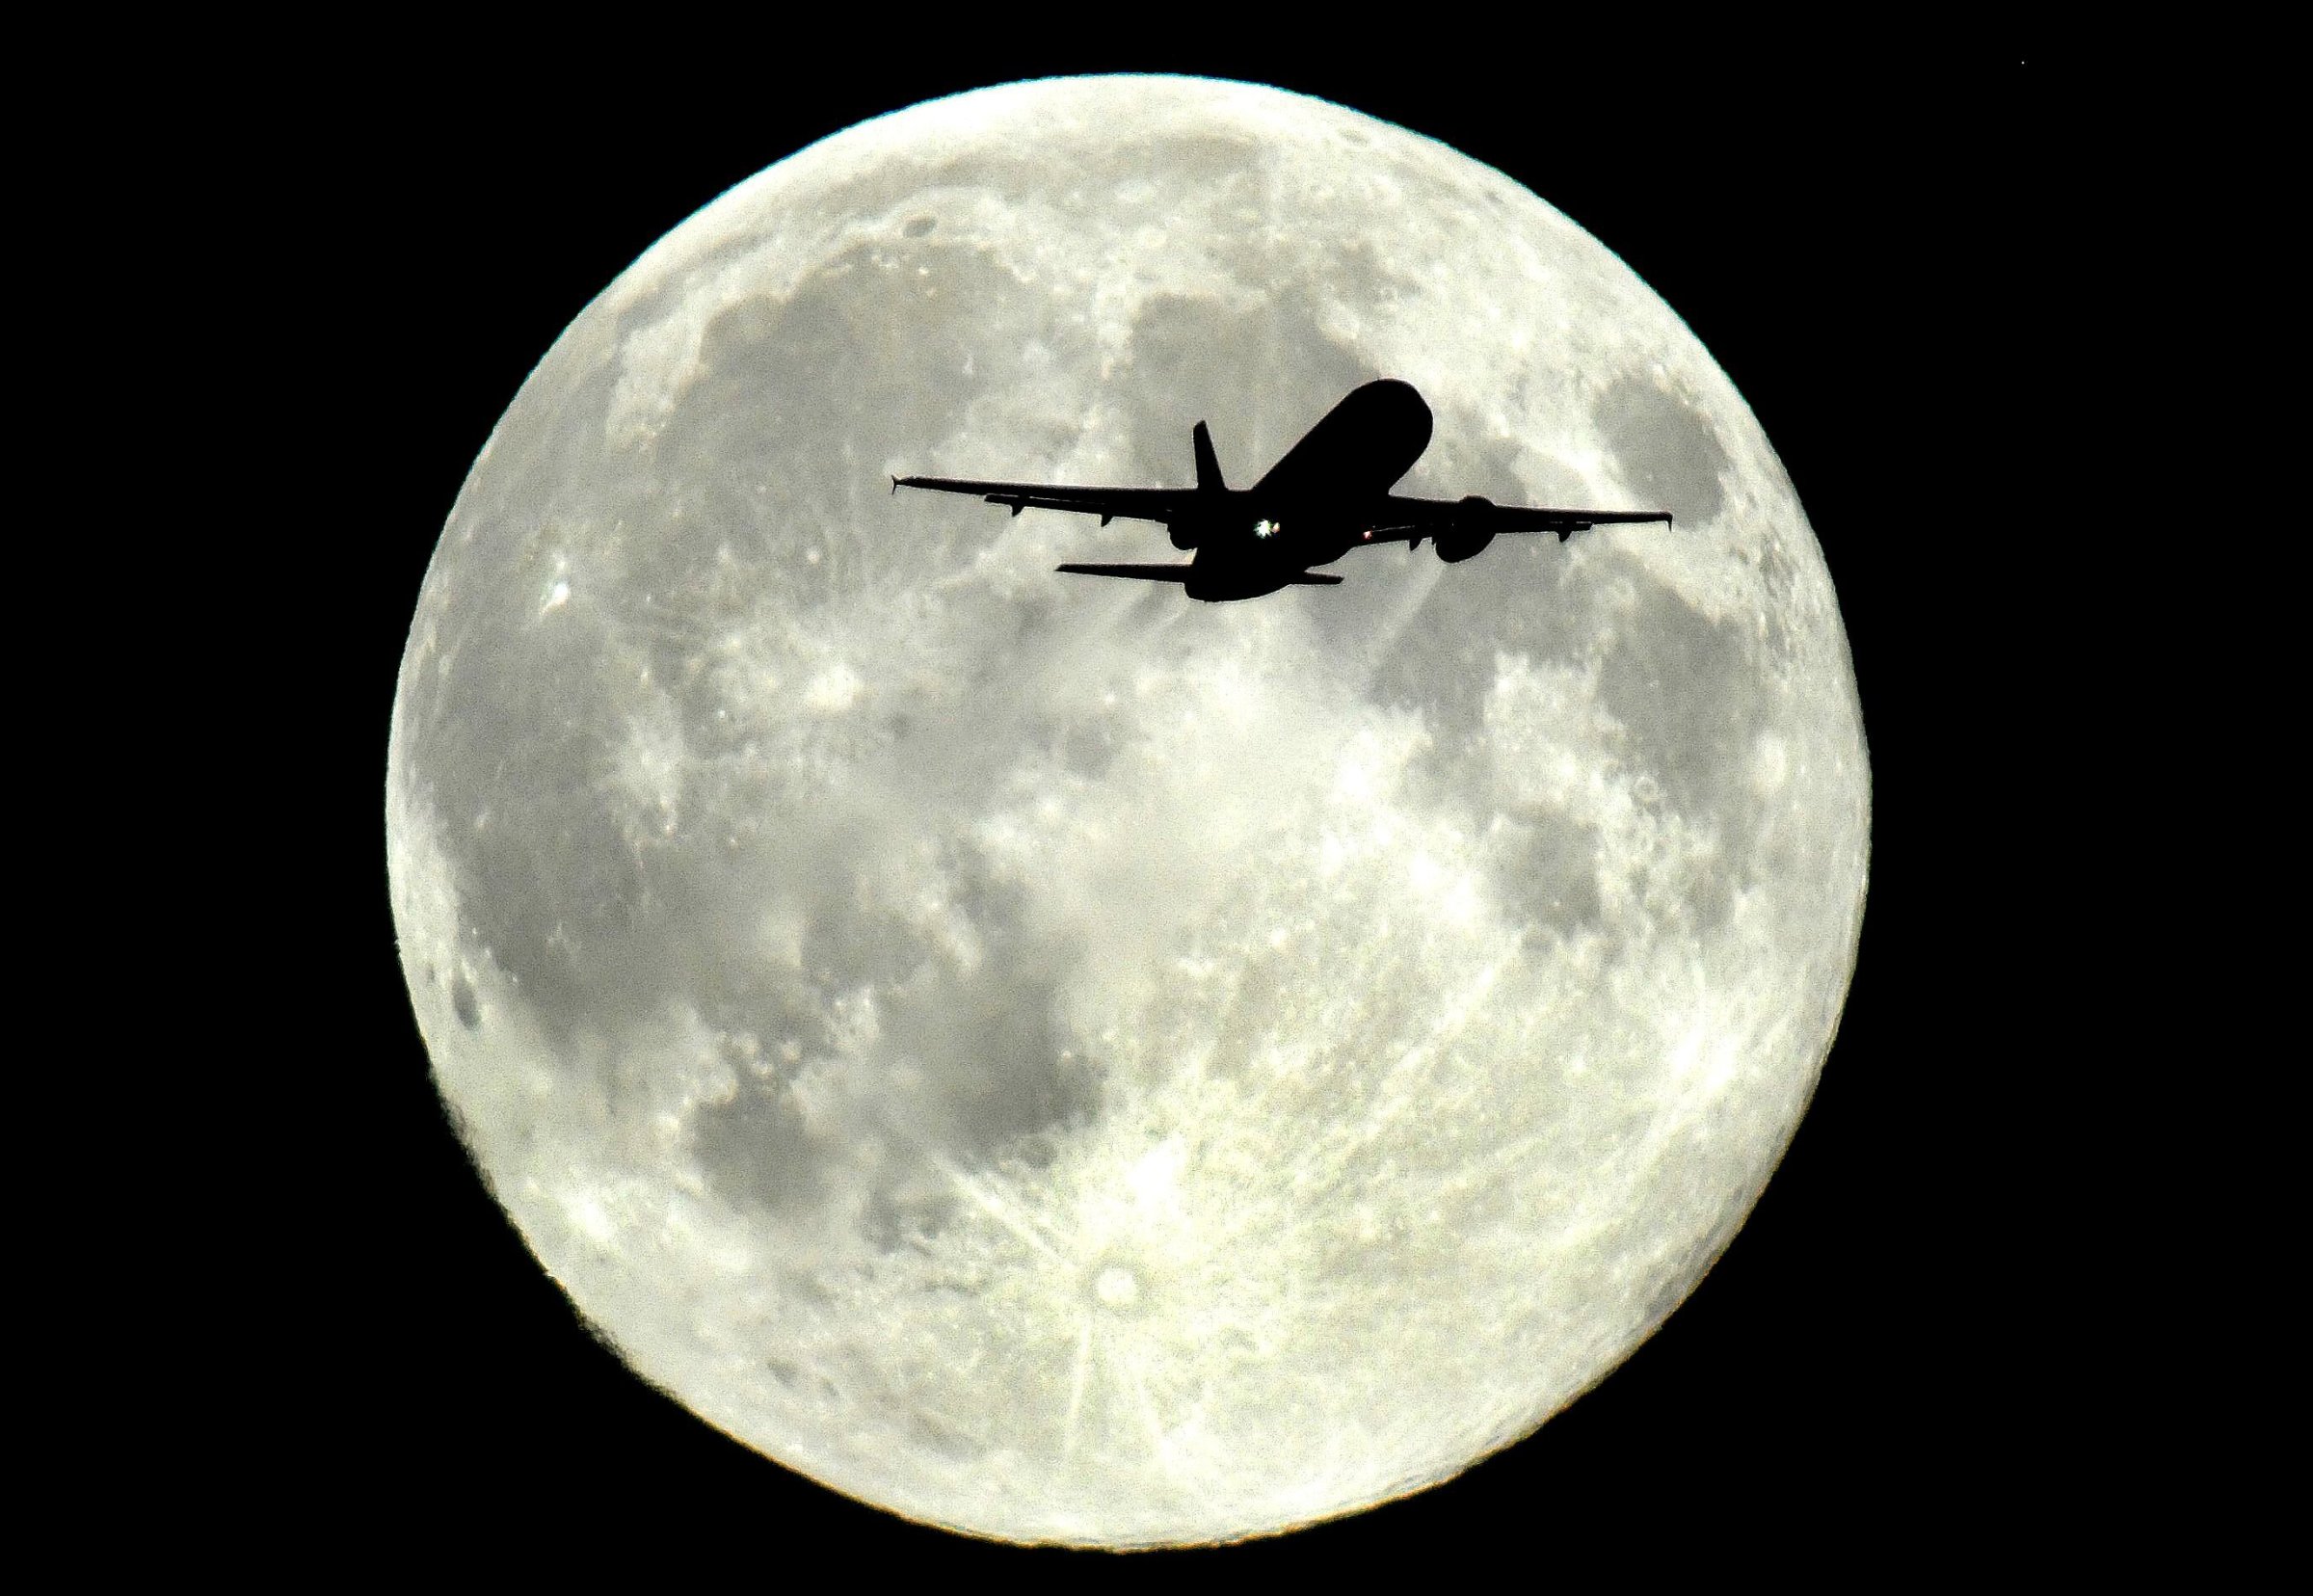 A plane flies in front of a supermoon above Westminster in London enroute to Heathrow airport on August 10, 2014.